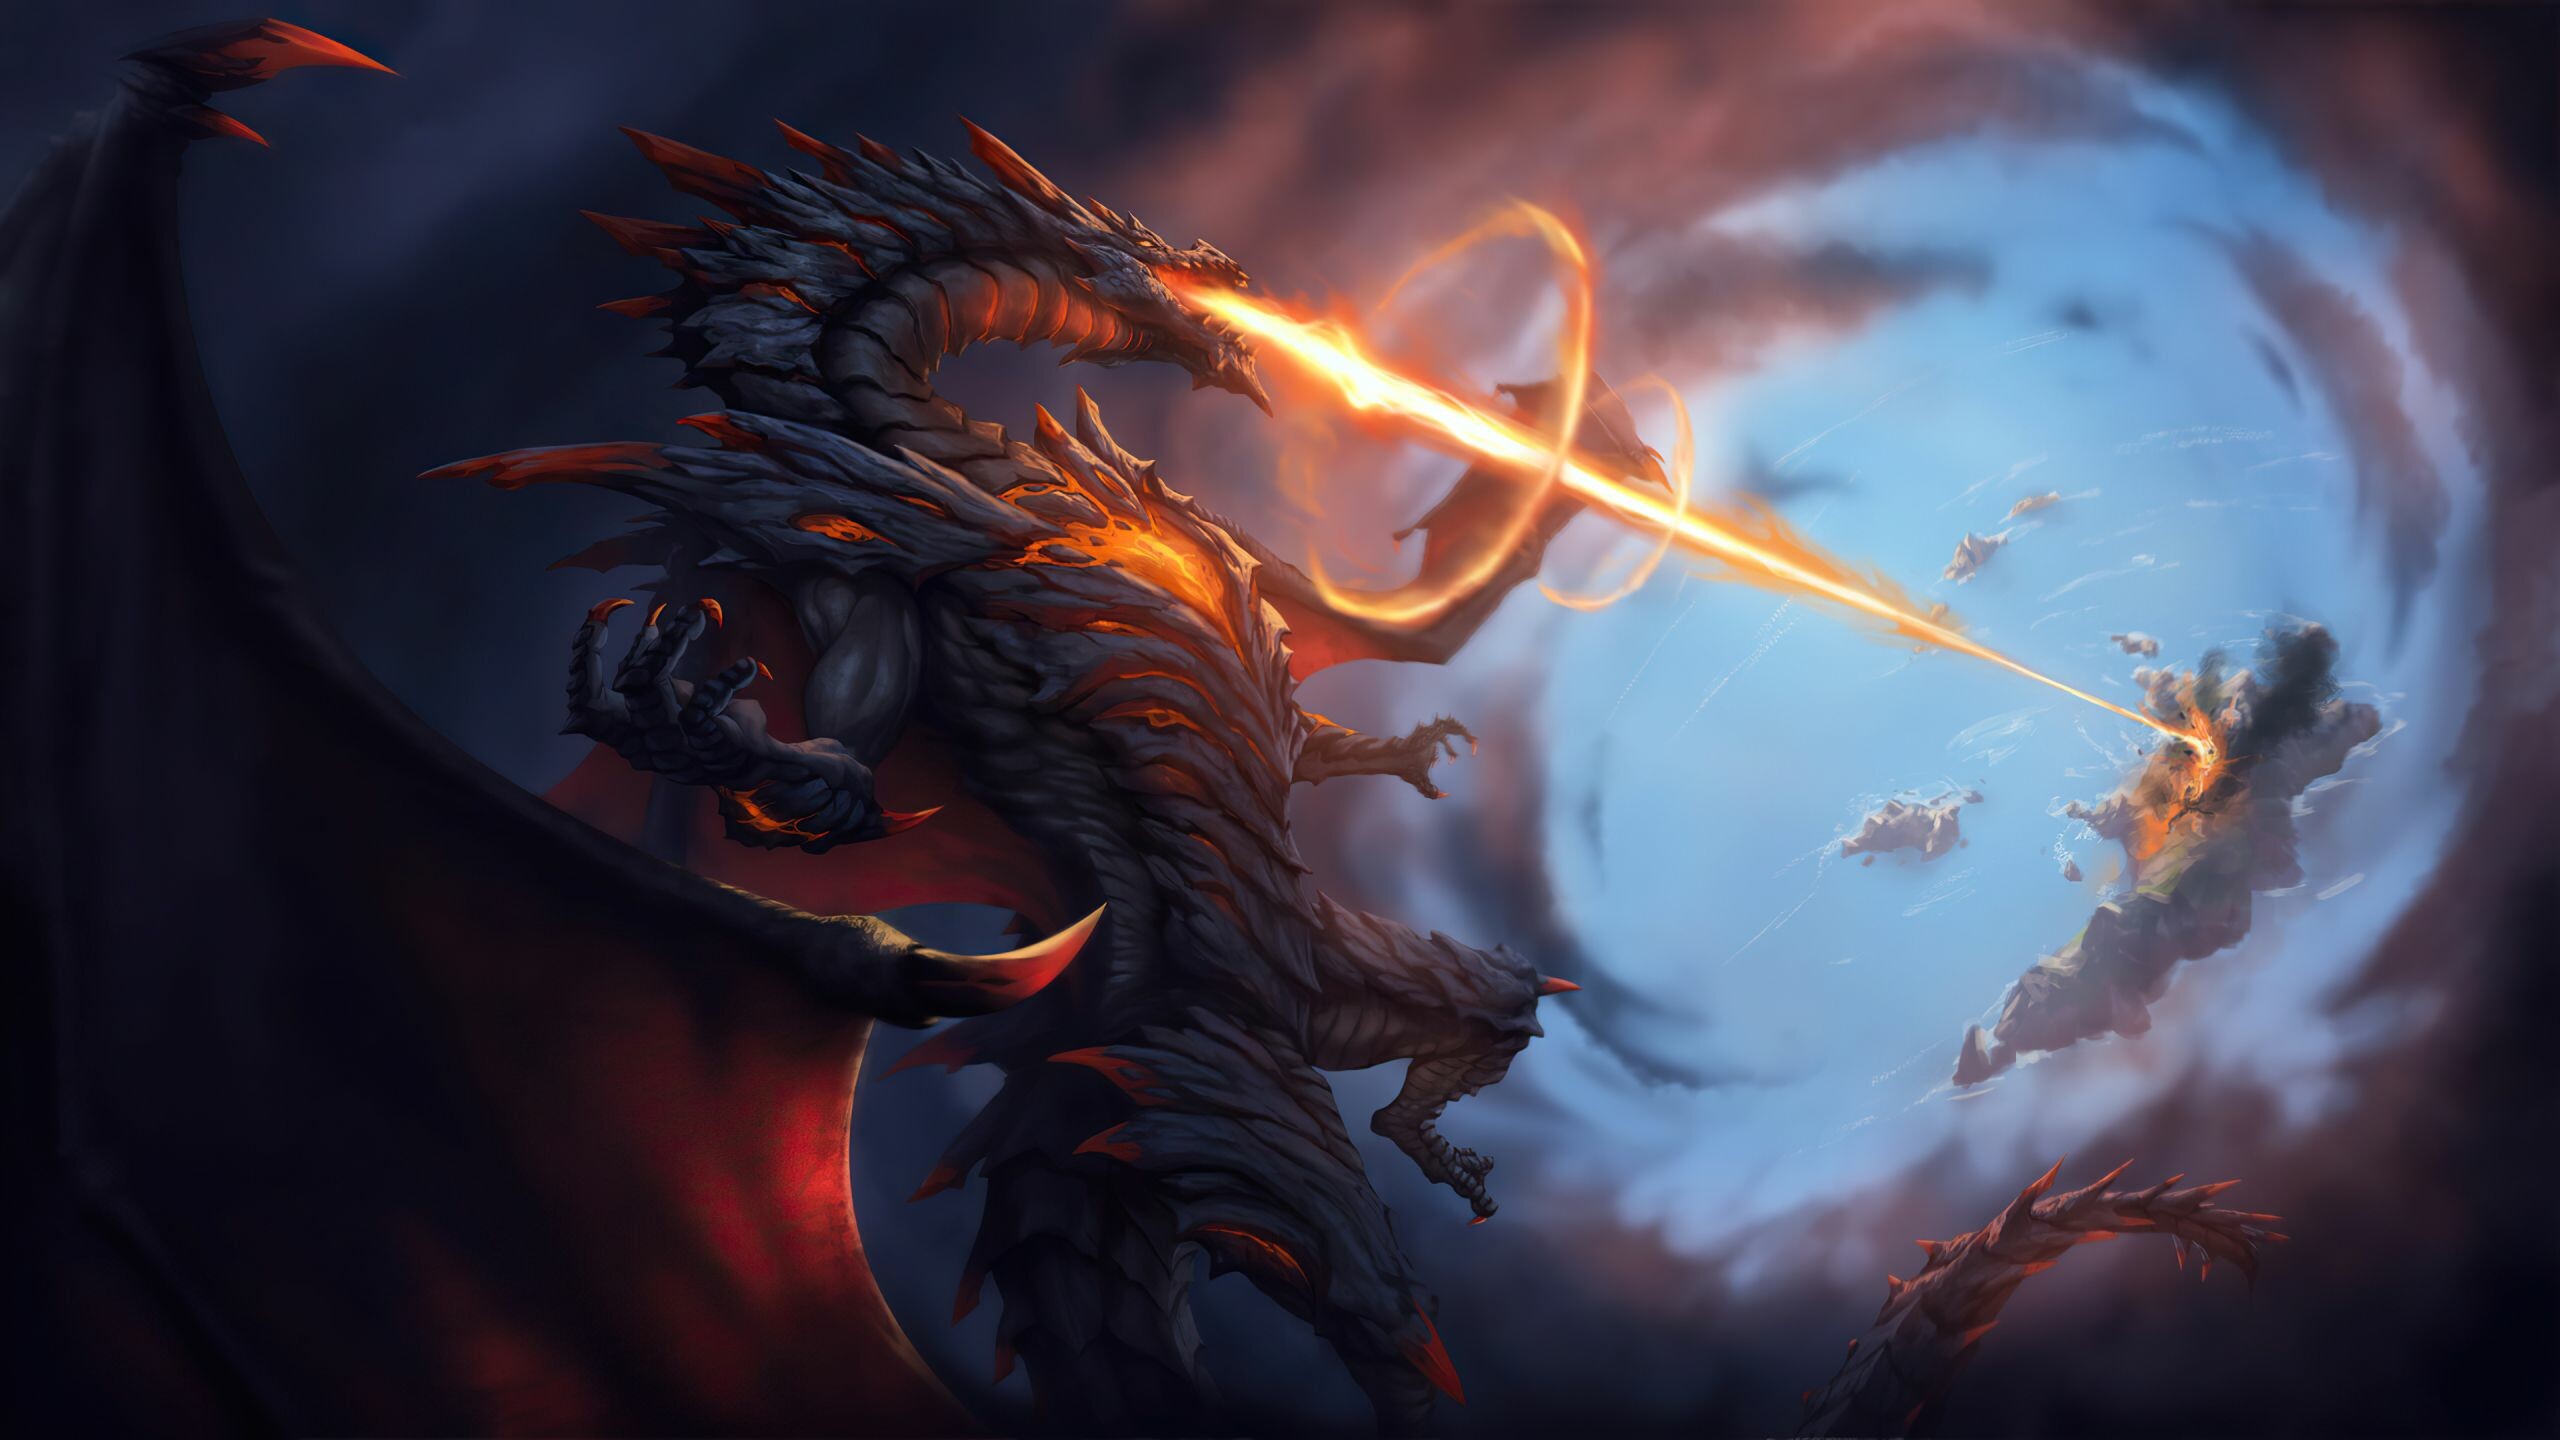 Dragon: Wyvern, A mythical animal, shooting flames out of its mouths. 2560x1440 HD Wallpaper.